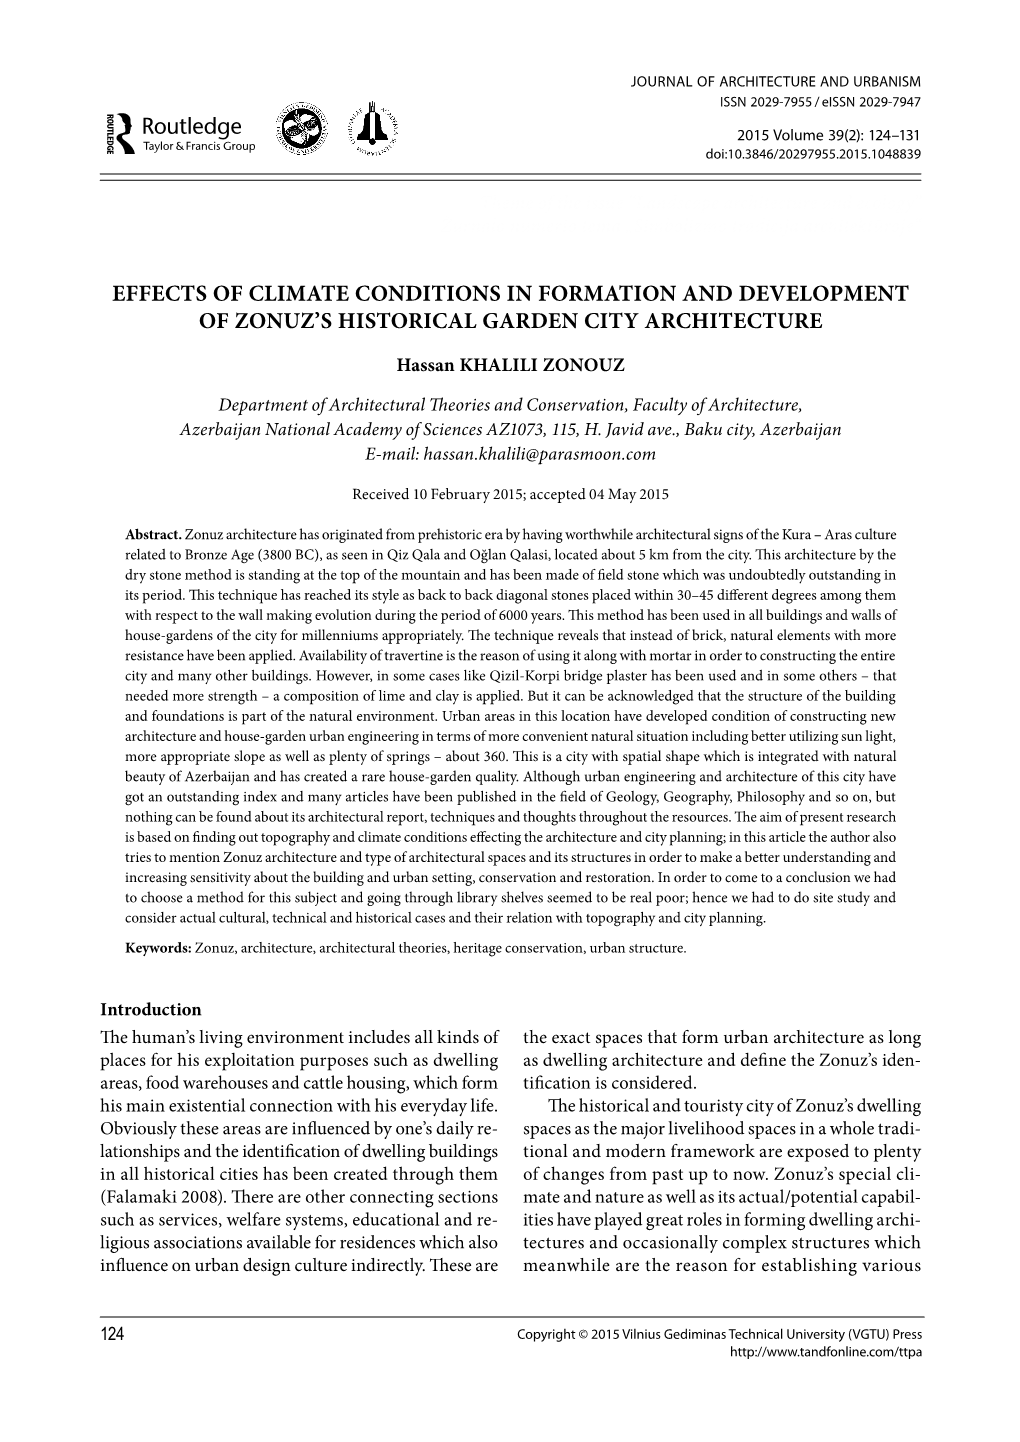 Effects of Climate Conditions in Formation and Development of Zonuz’S Historical Garden City Architecture